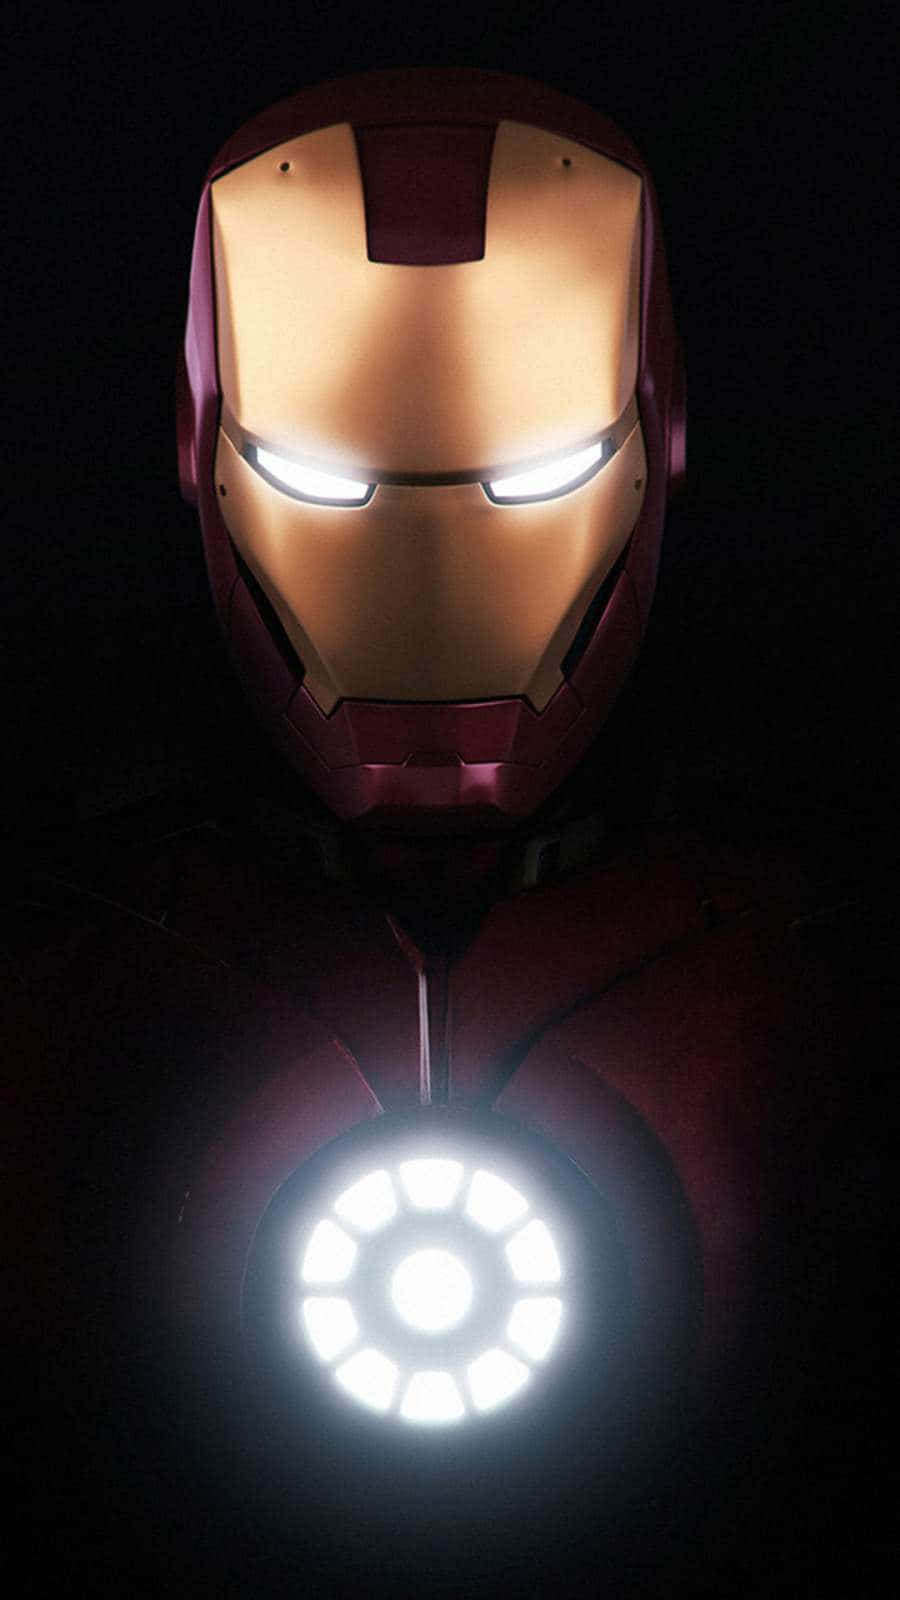 suit up and fly high with this Iron Man fan art Wallpaper